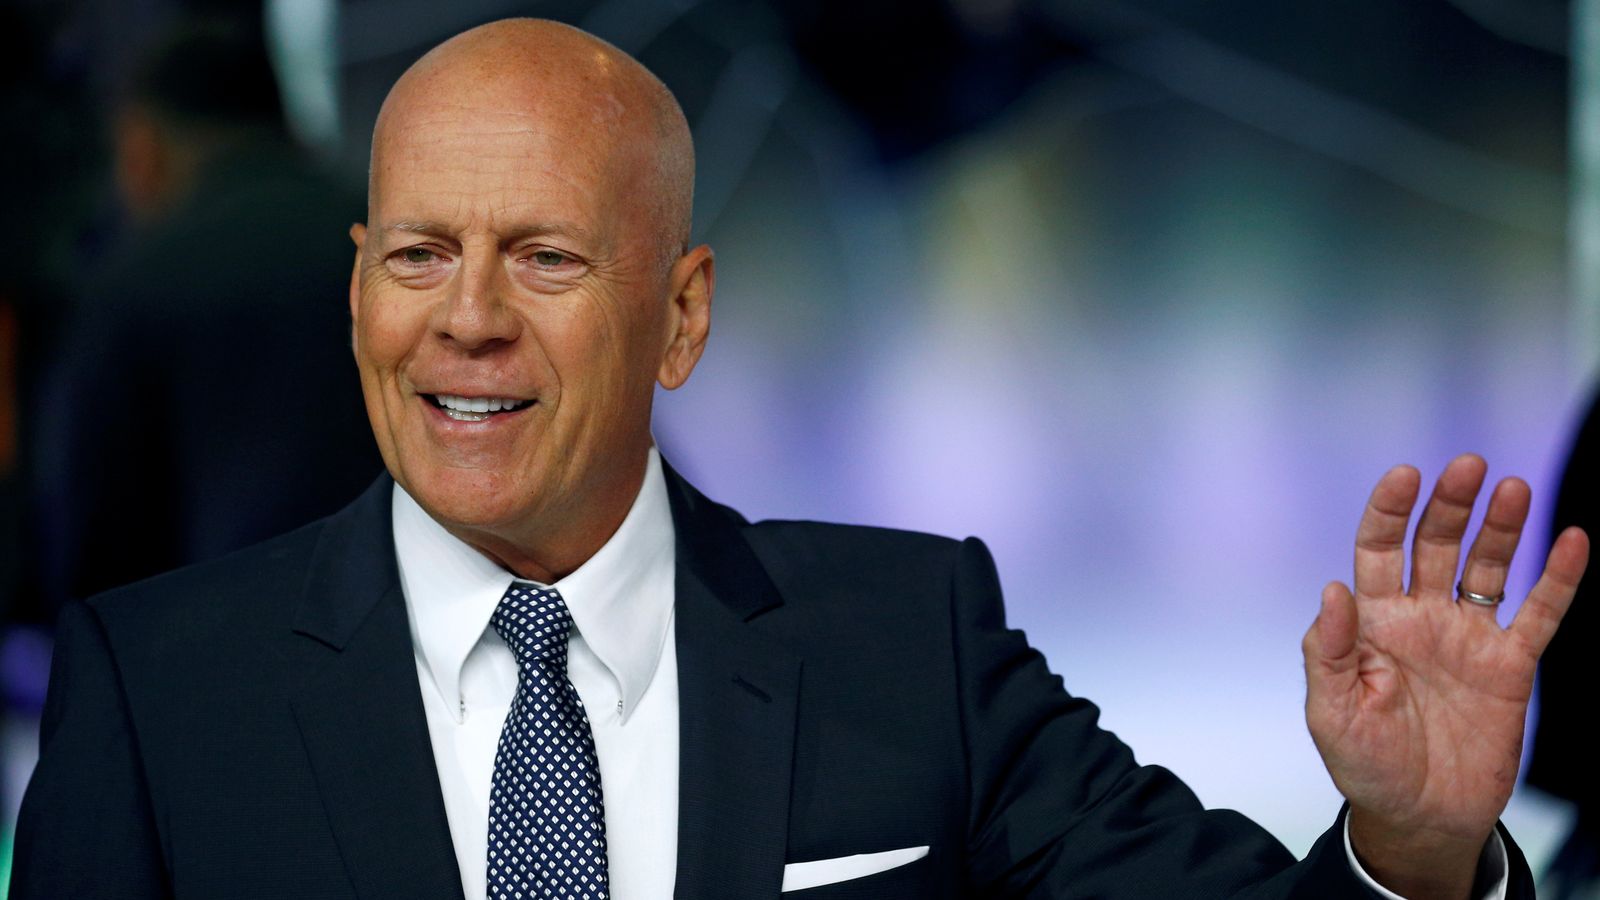 Bruce Willis's daughter shares update on his 'aggressive' dementia